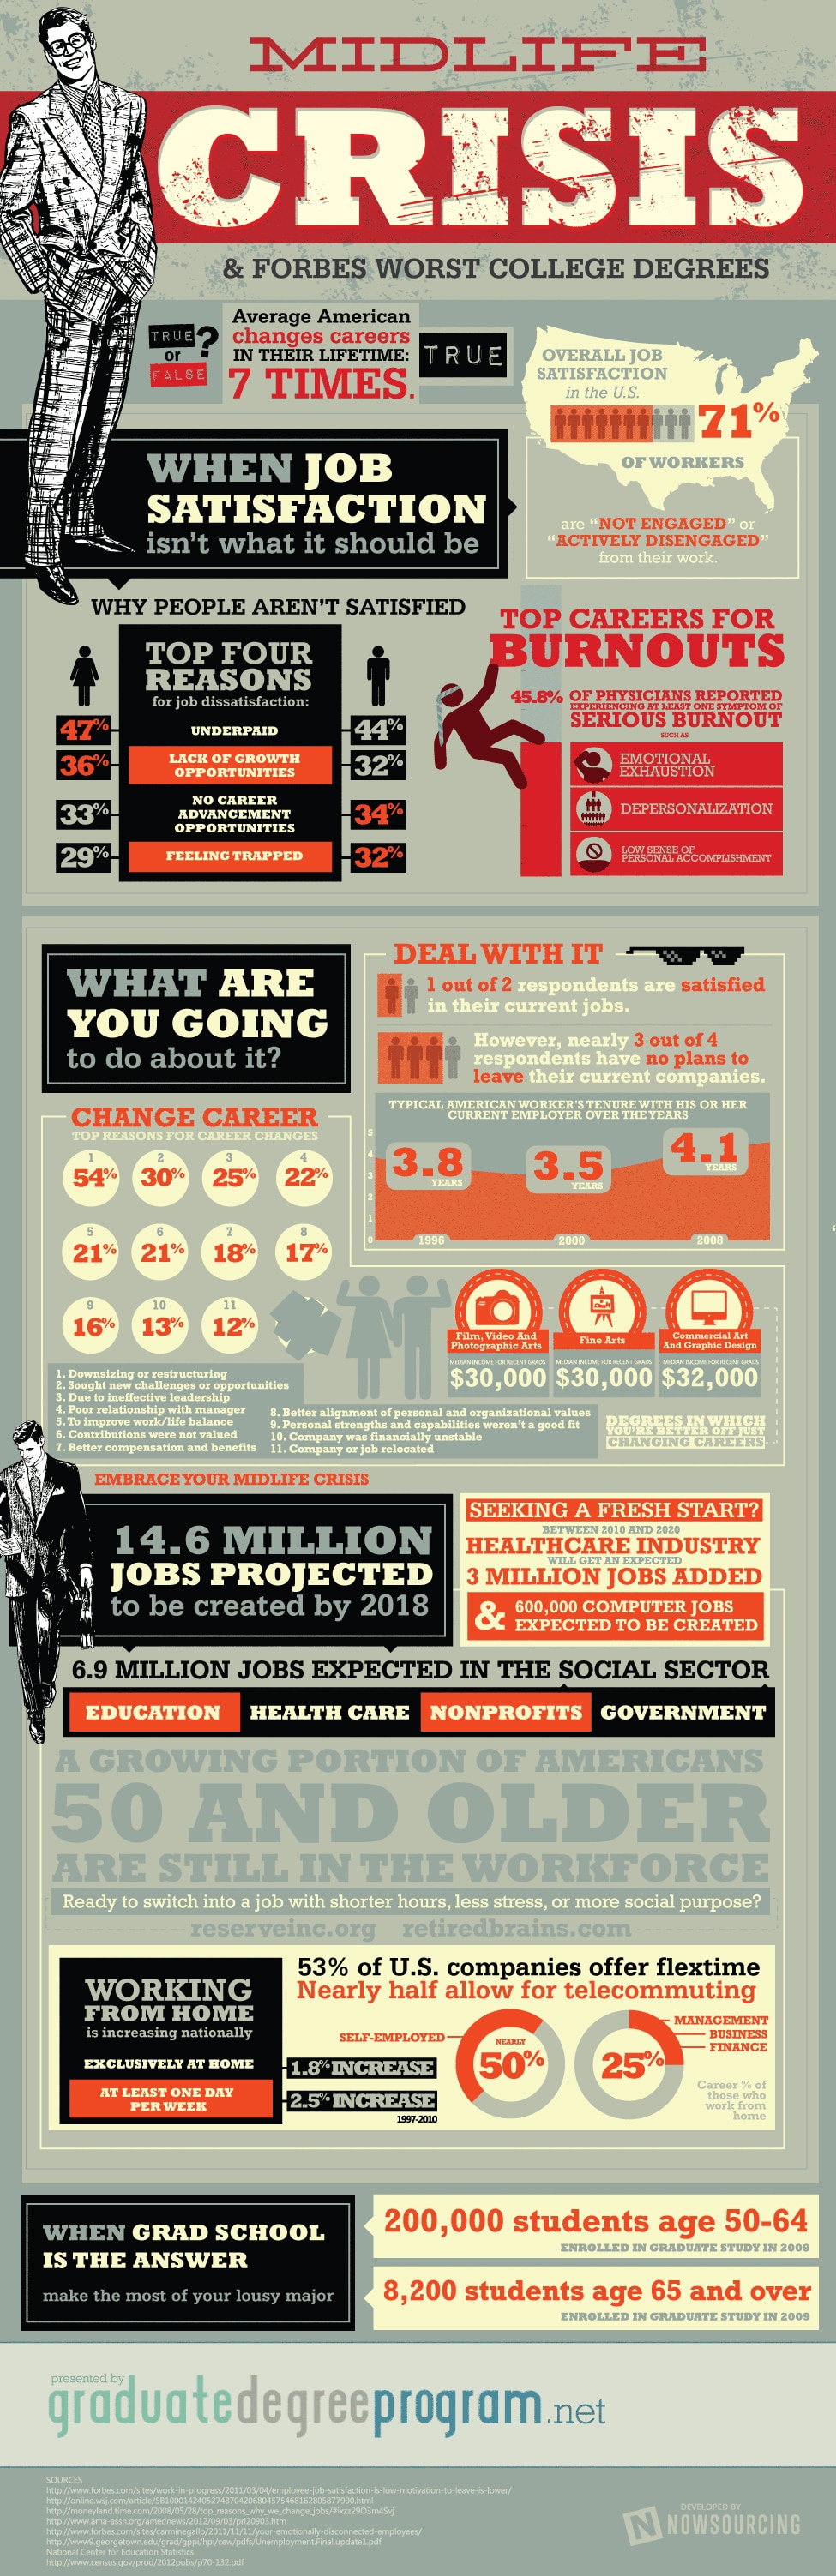 Midlife Crisis: Overall Job Satisfaction In America [Infographic]